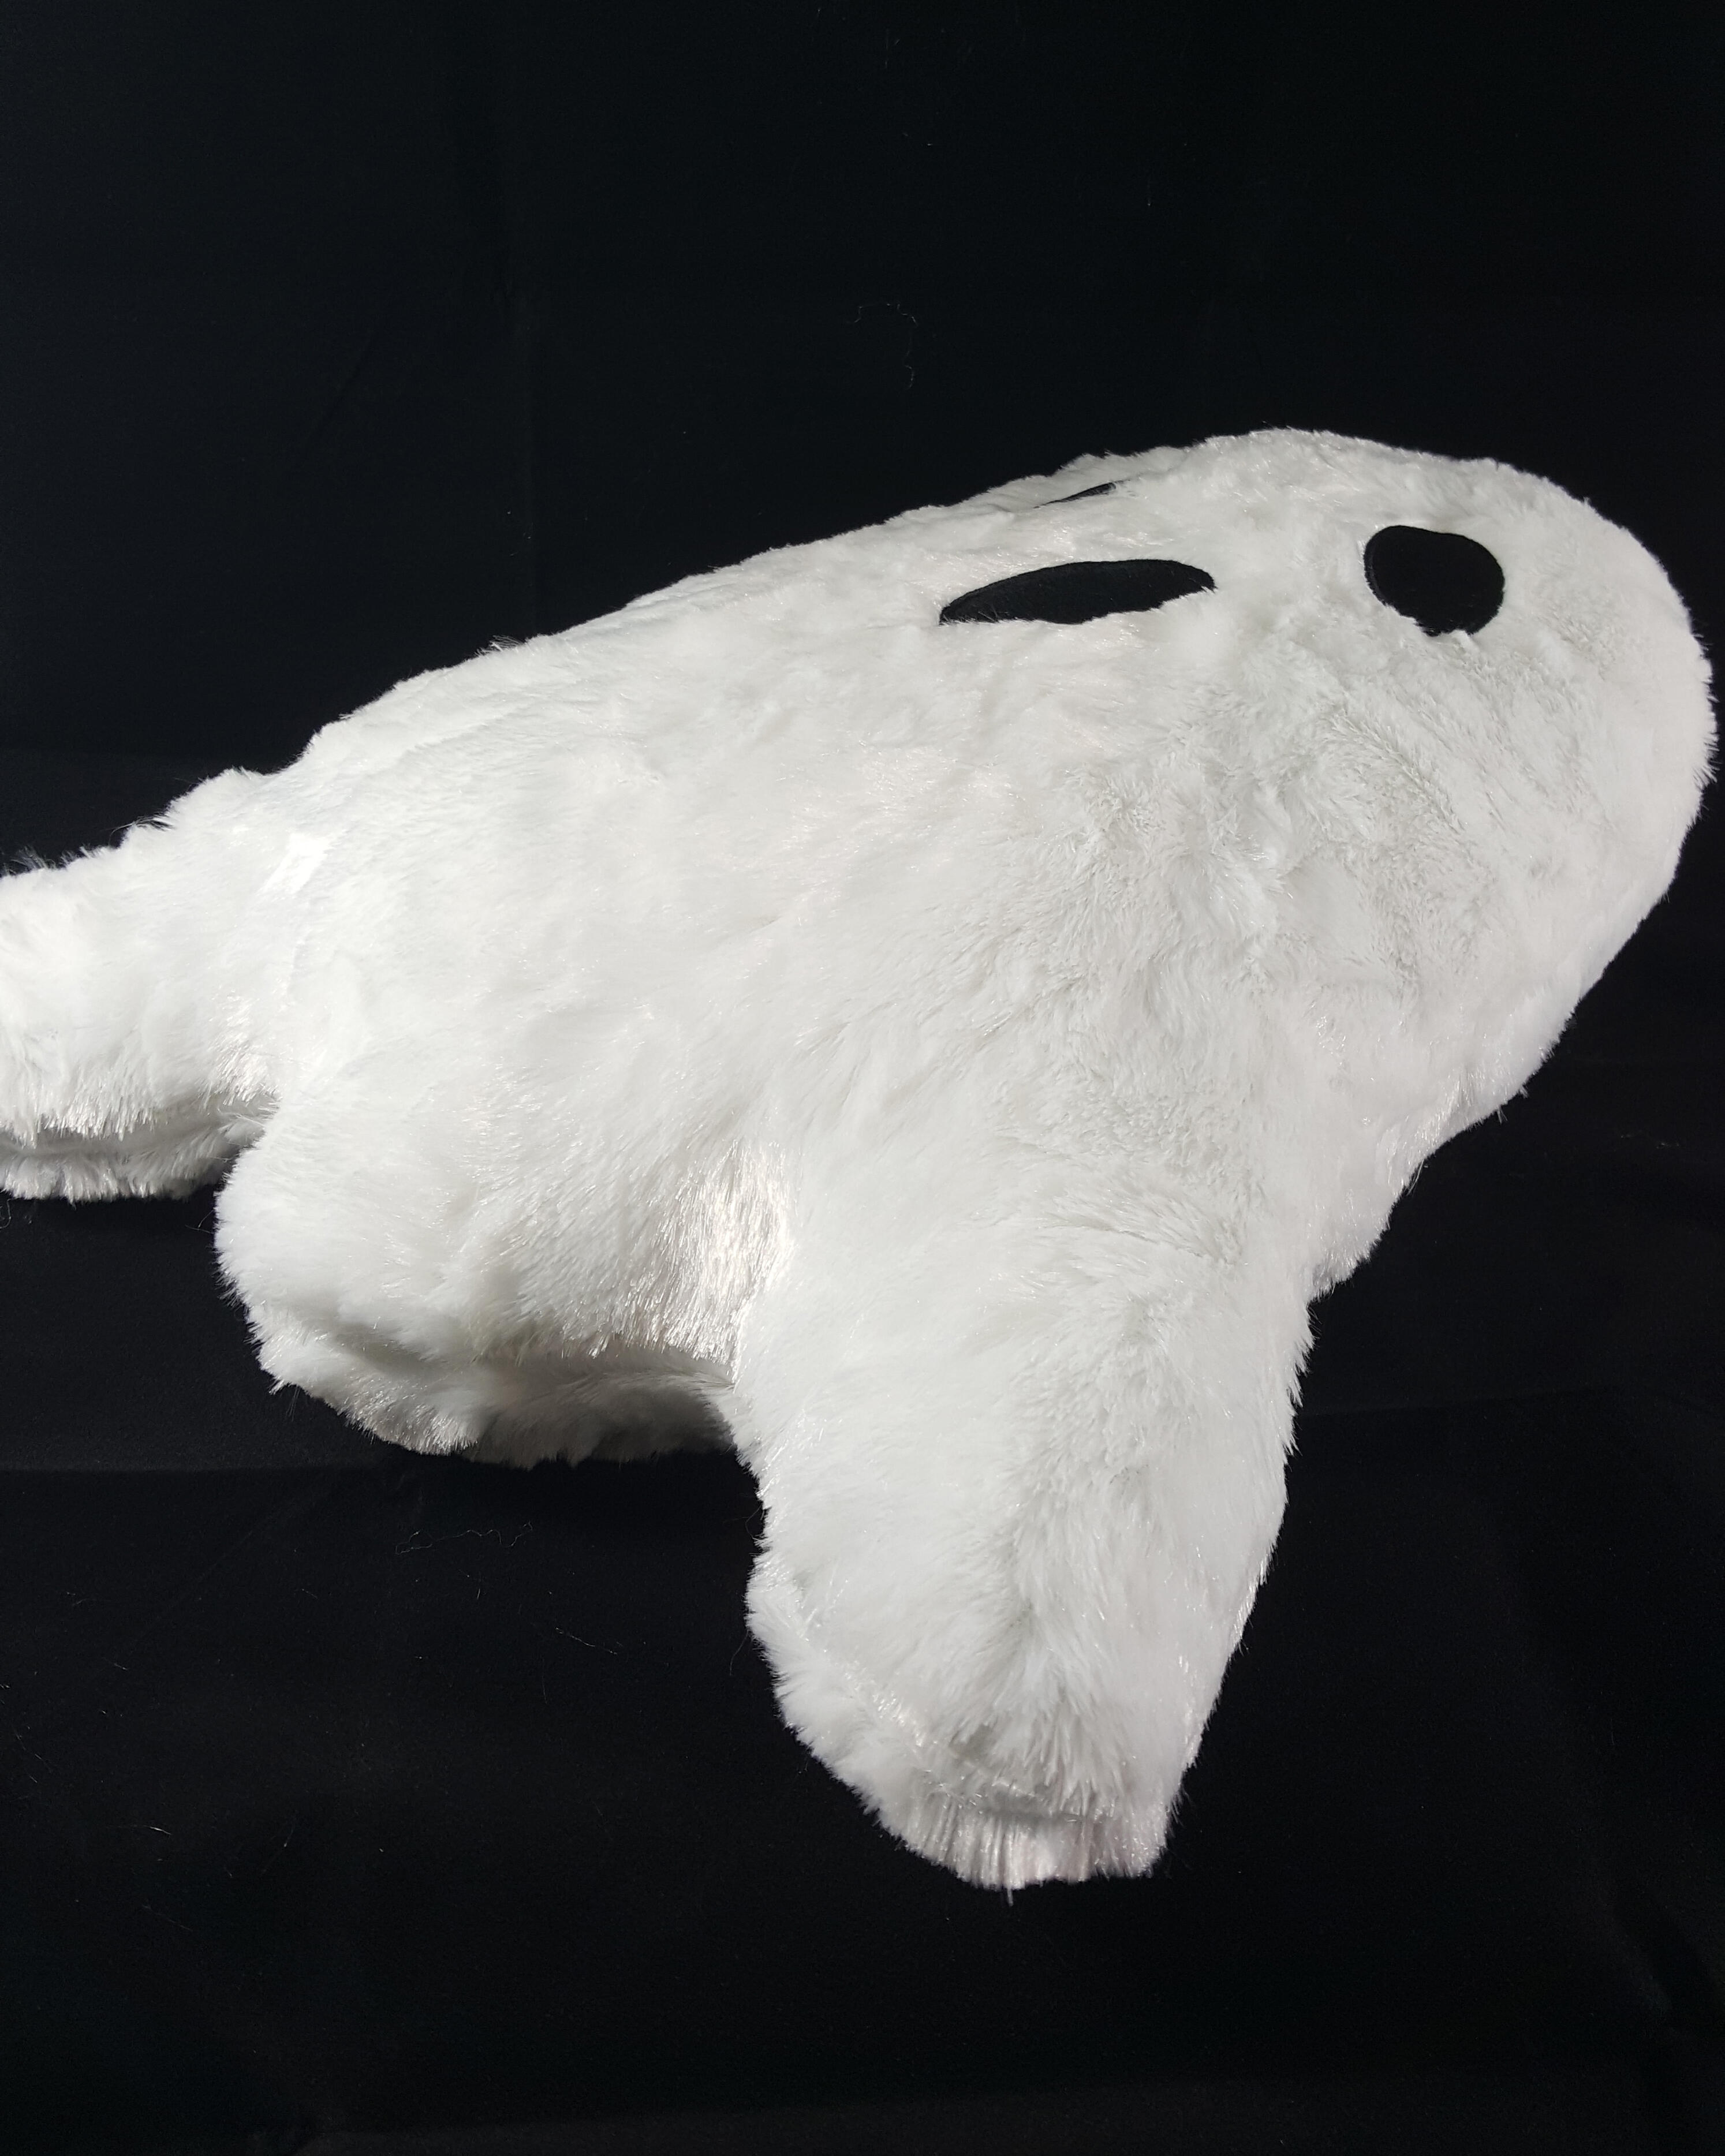 Home & Living :: Home Decor :: Pillows & Cushions :: Furry Ghost Pillow,  Halloween Decor, black and white, spooky stuffed animal, ghoul, halloween  pillow, plush, party decorations, goth gift cute